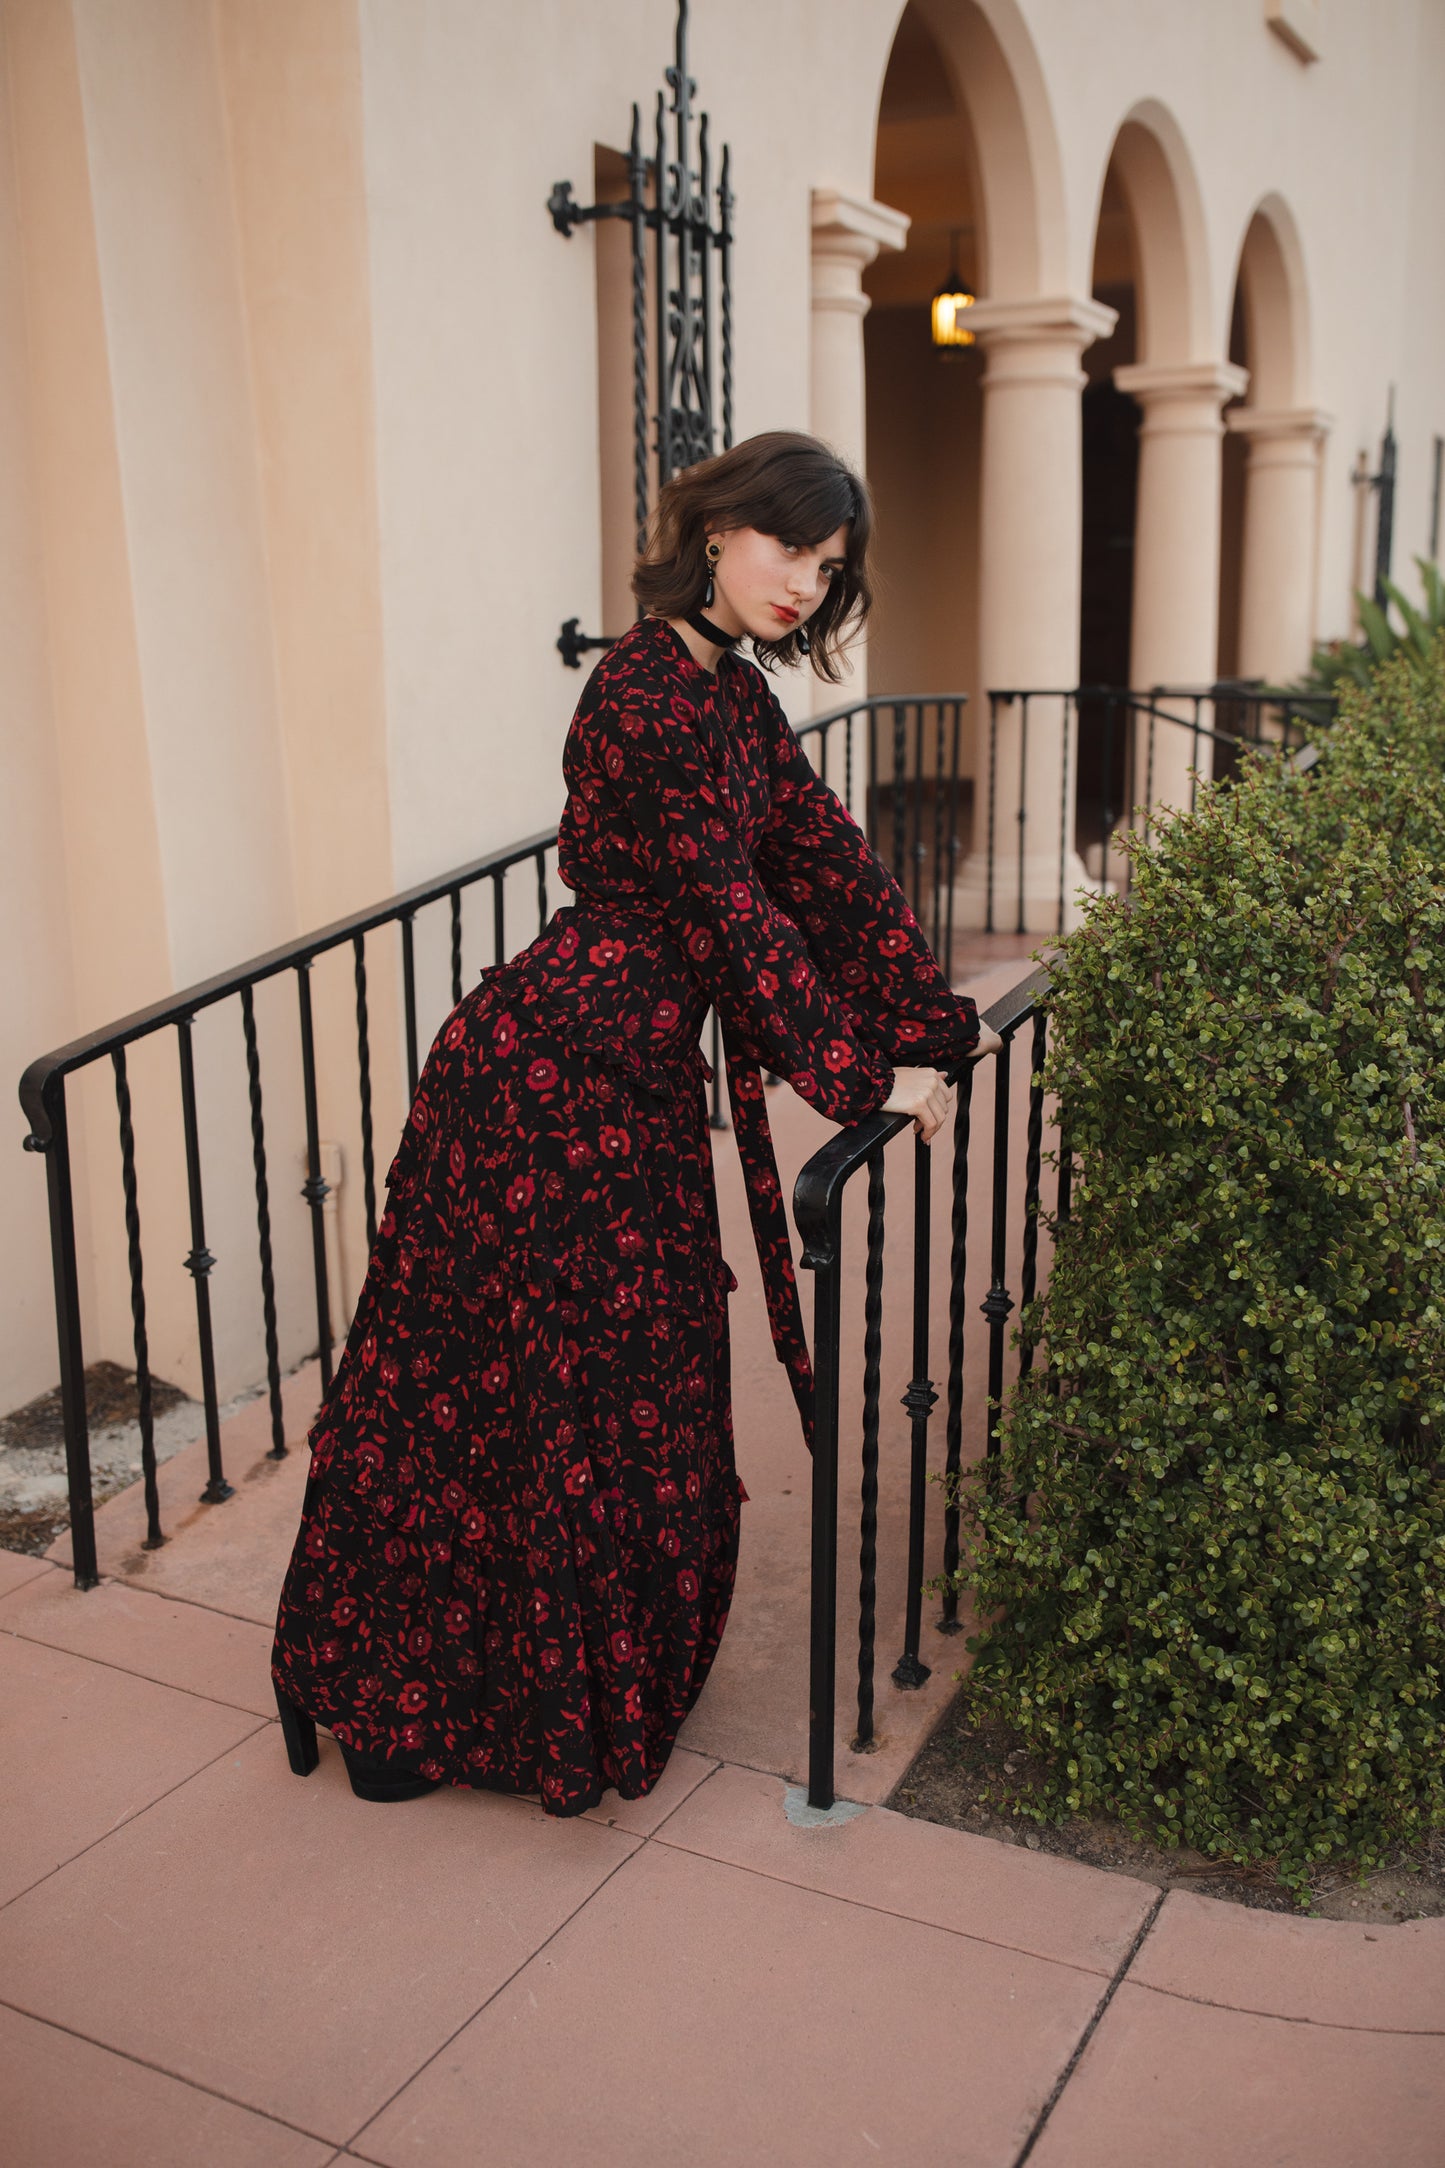 jennafer grace Vampira Love Maxi Dress black & scarlet red crimson floral long sleeve dress with high neck cinched waist tie bishop sleeve retro vintage goth gothic evening dress boho bohemian hippie romantic whimsical handmade in California USA